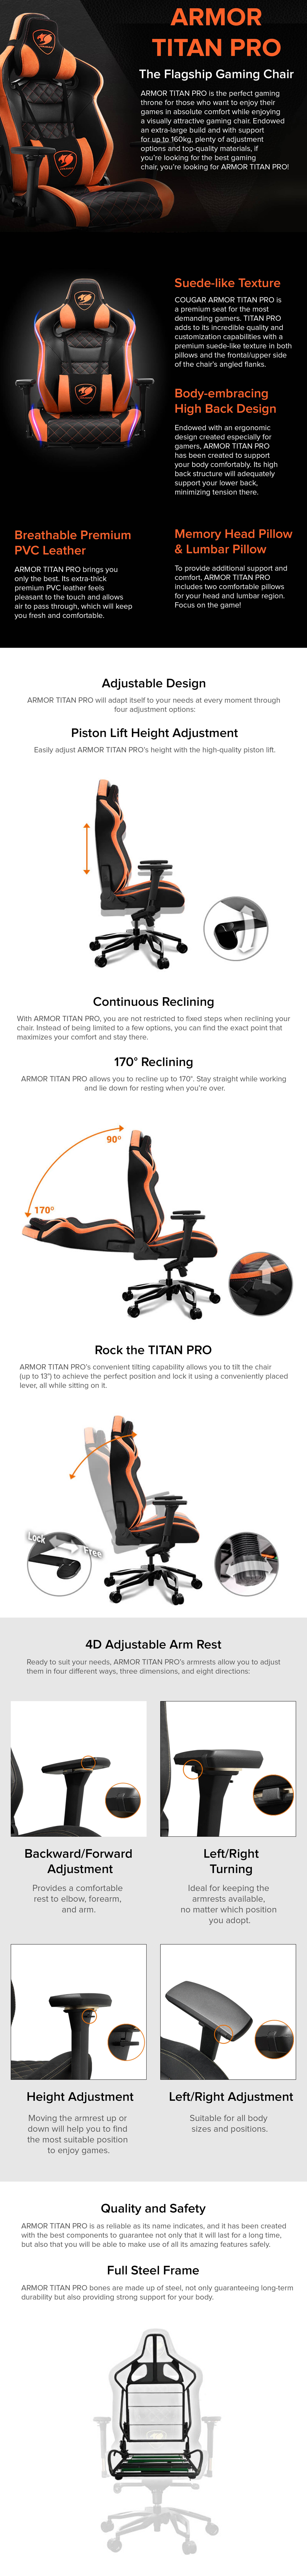 Cougar Armor Titan PRO Gaming Chair with Premium Breathable PVC Leather KSA